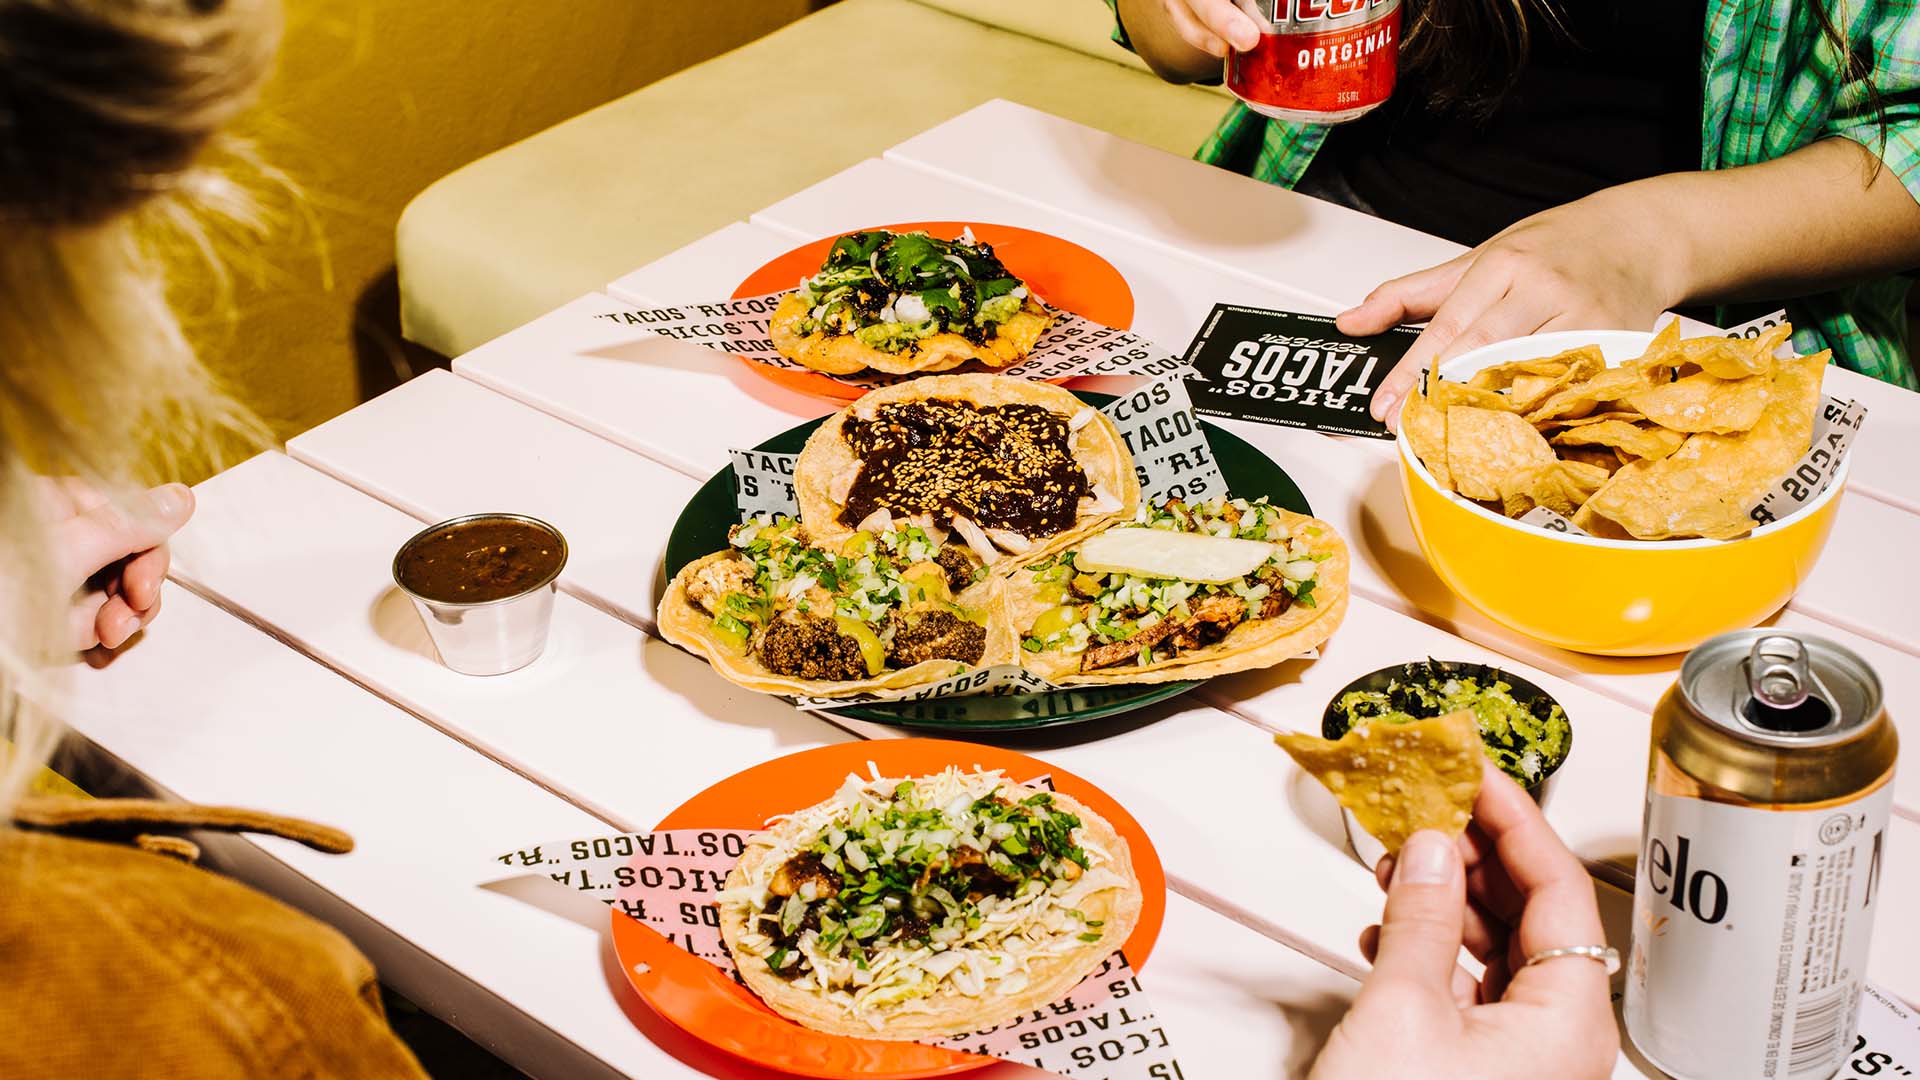 The Ambitious New Ricos Tacos Is Opening Across Two Levels of The Norfolk Hotel This Month